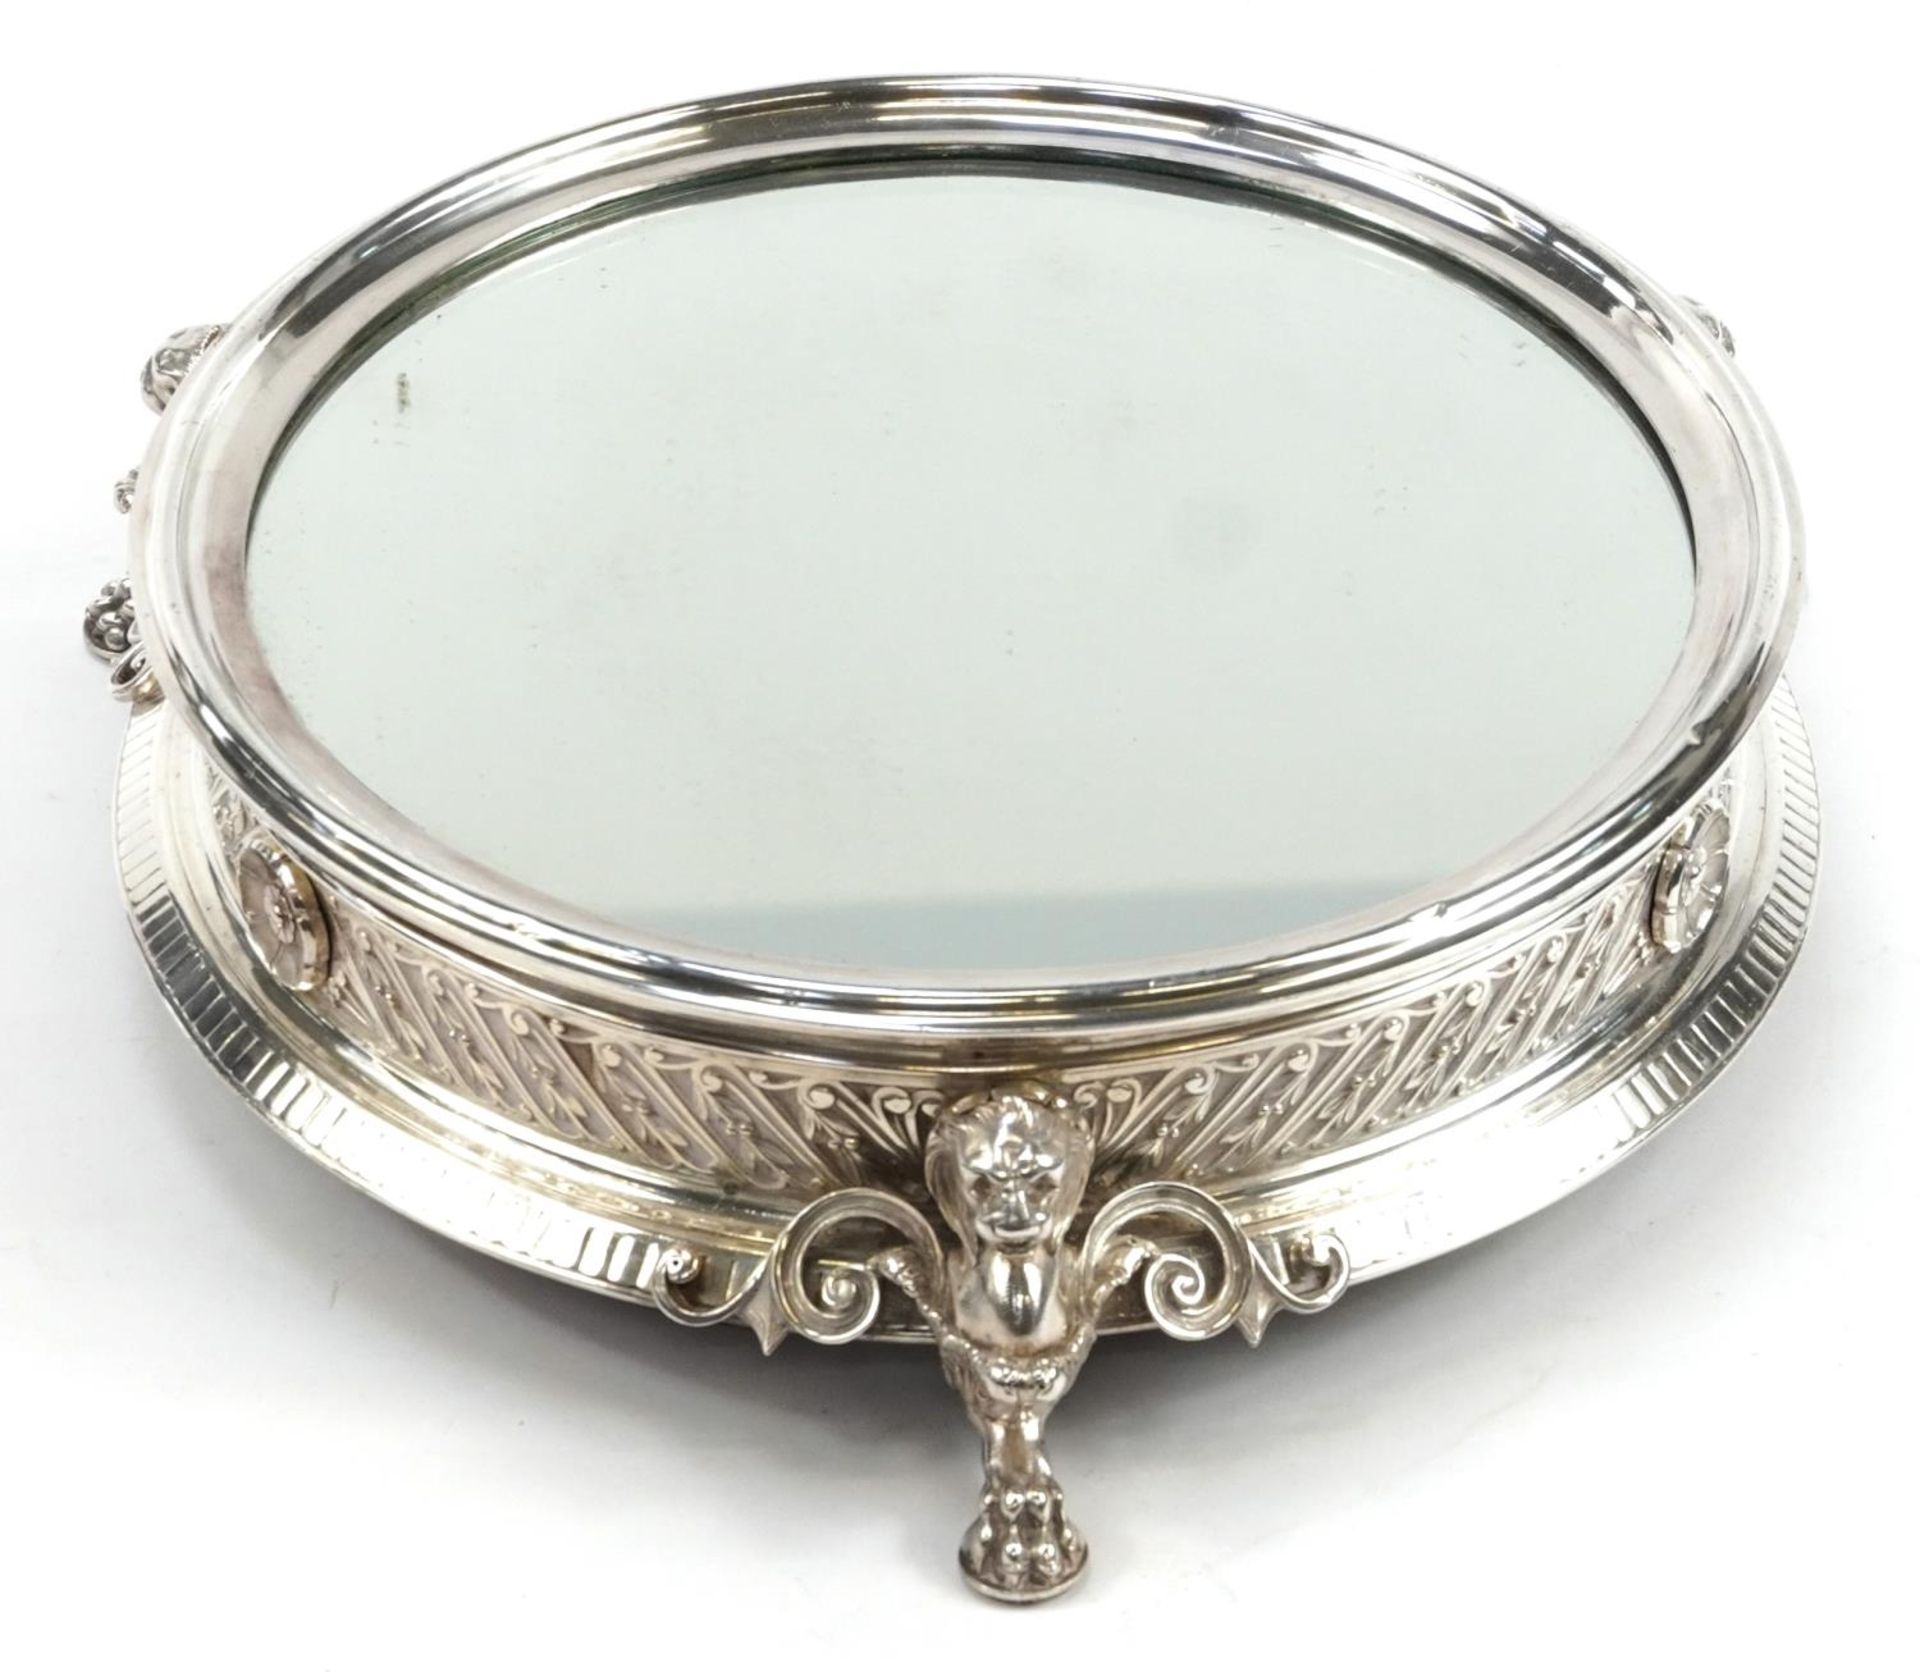 Elkington & Co, good Victorian silver plated mirrored cake stand with three lion design supports - Image 4 of 7